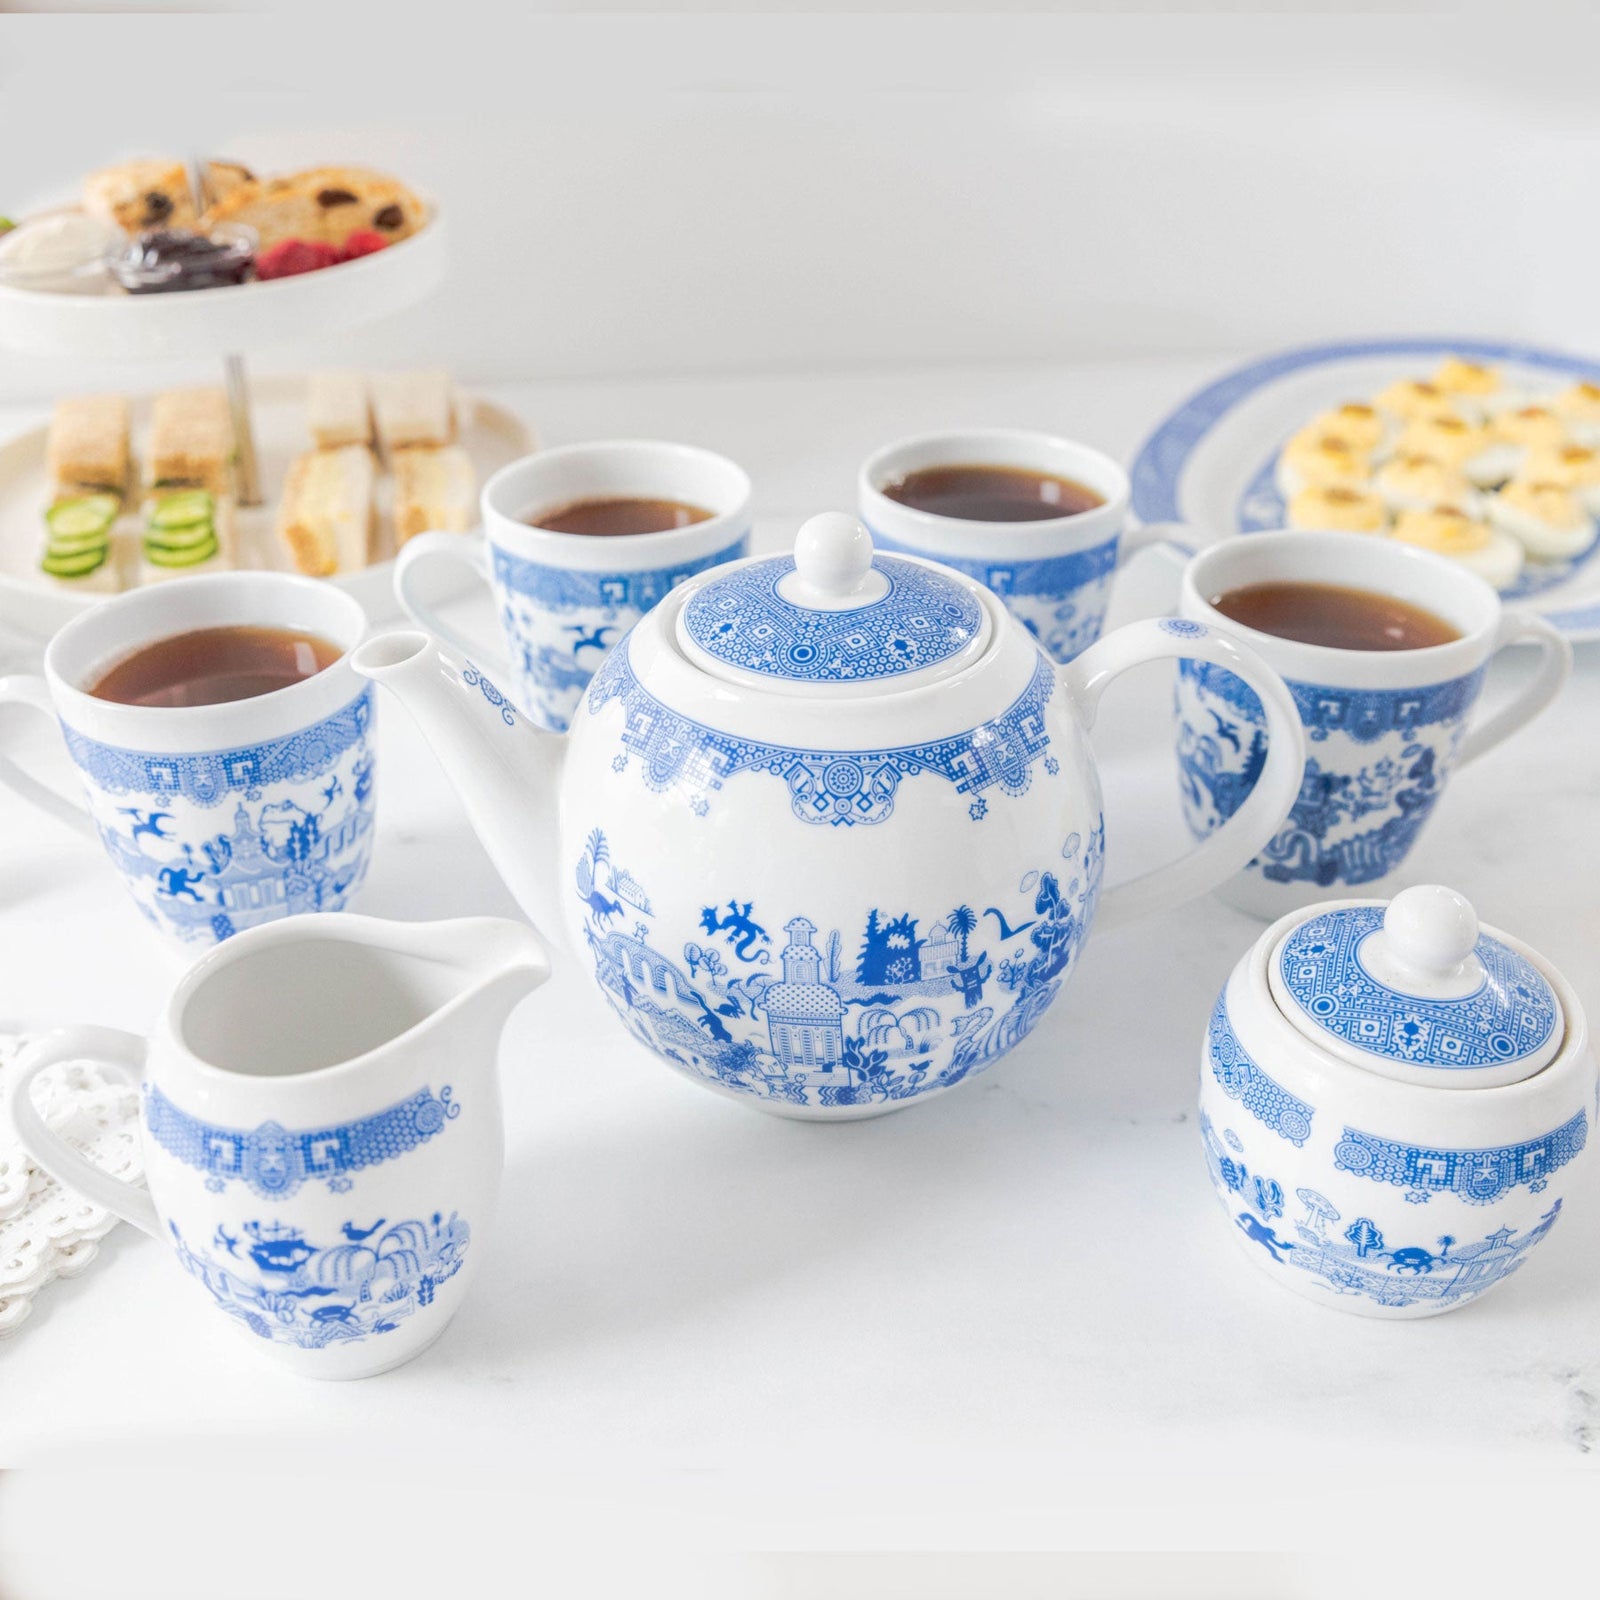 Things Could Be Worse Teacups and Saucers (2-pack) - Calamityware®